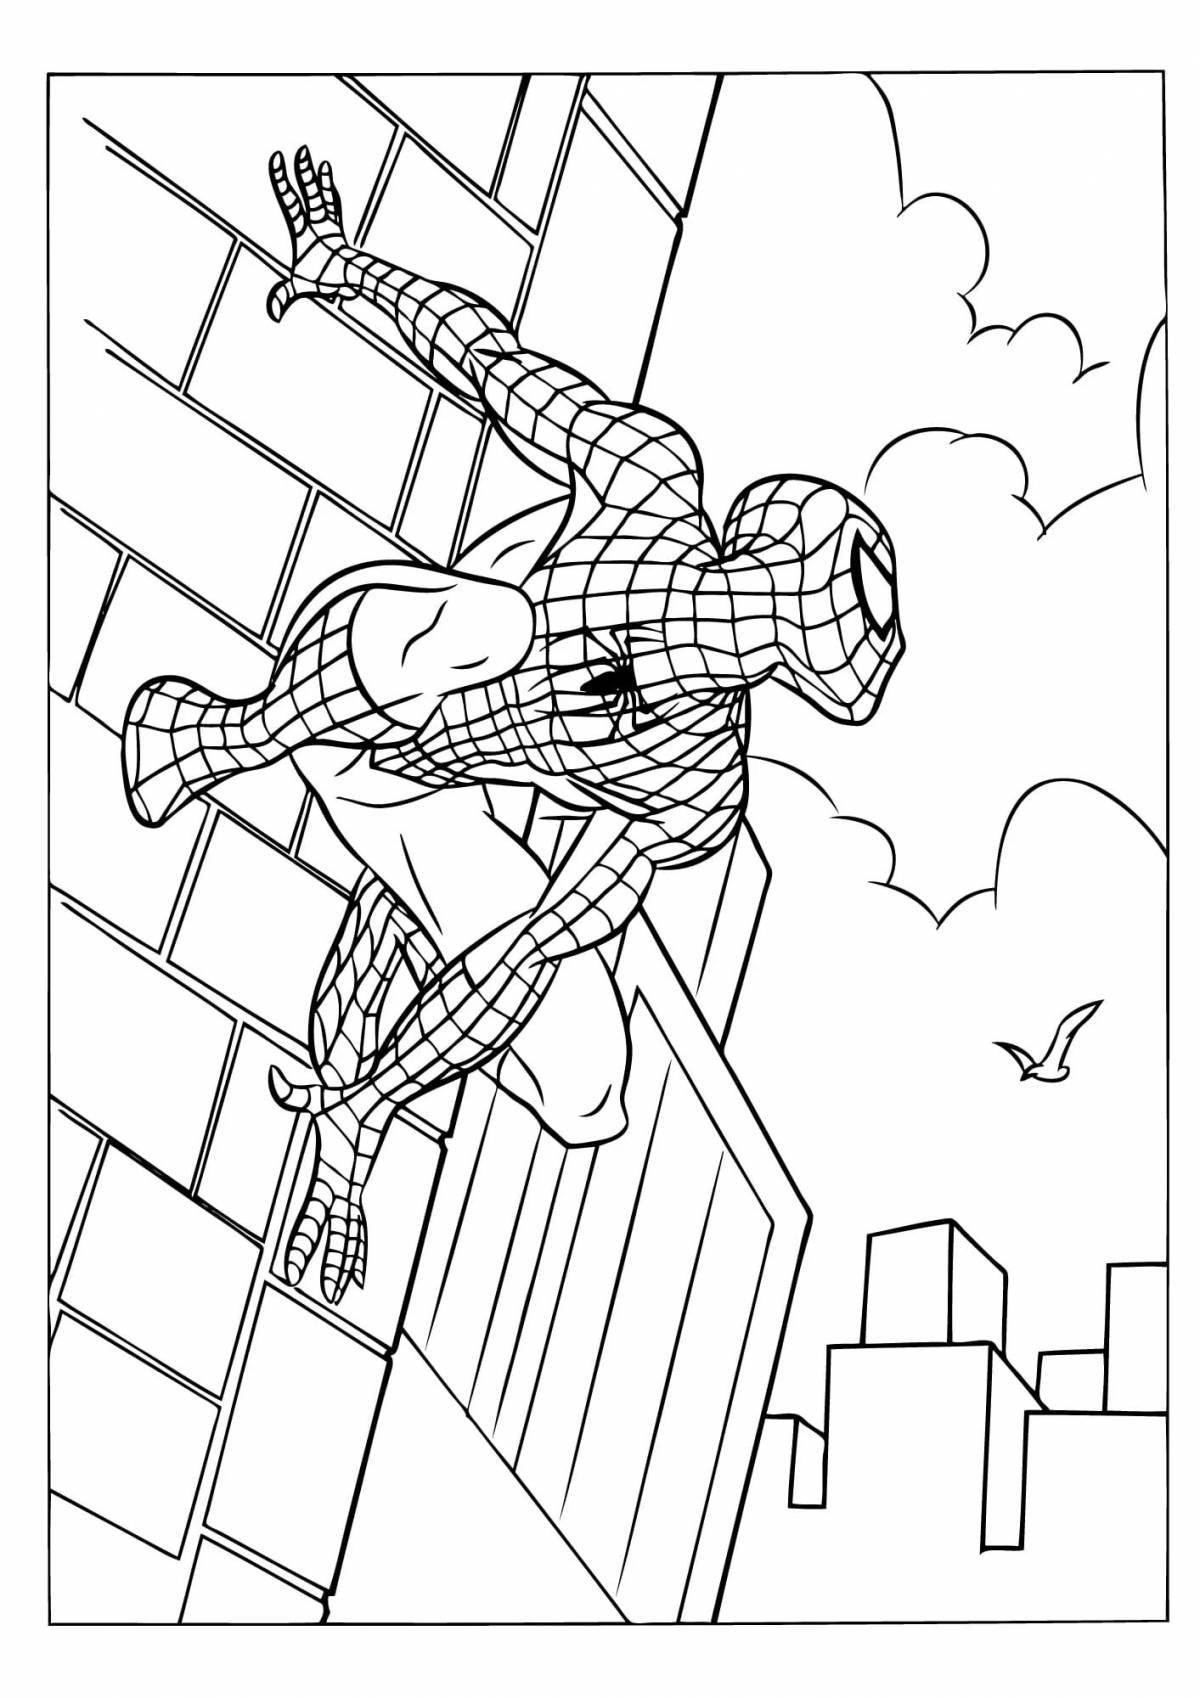 Spiderman dynamic cartoon coloring page